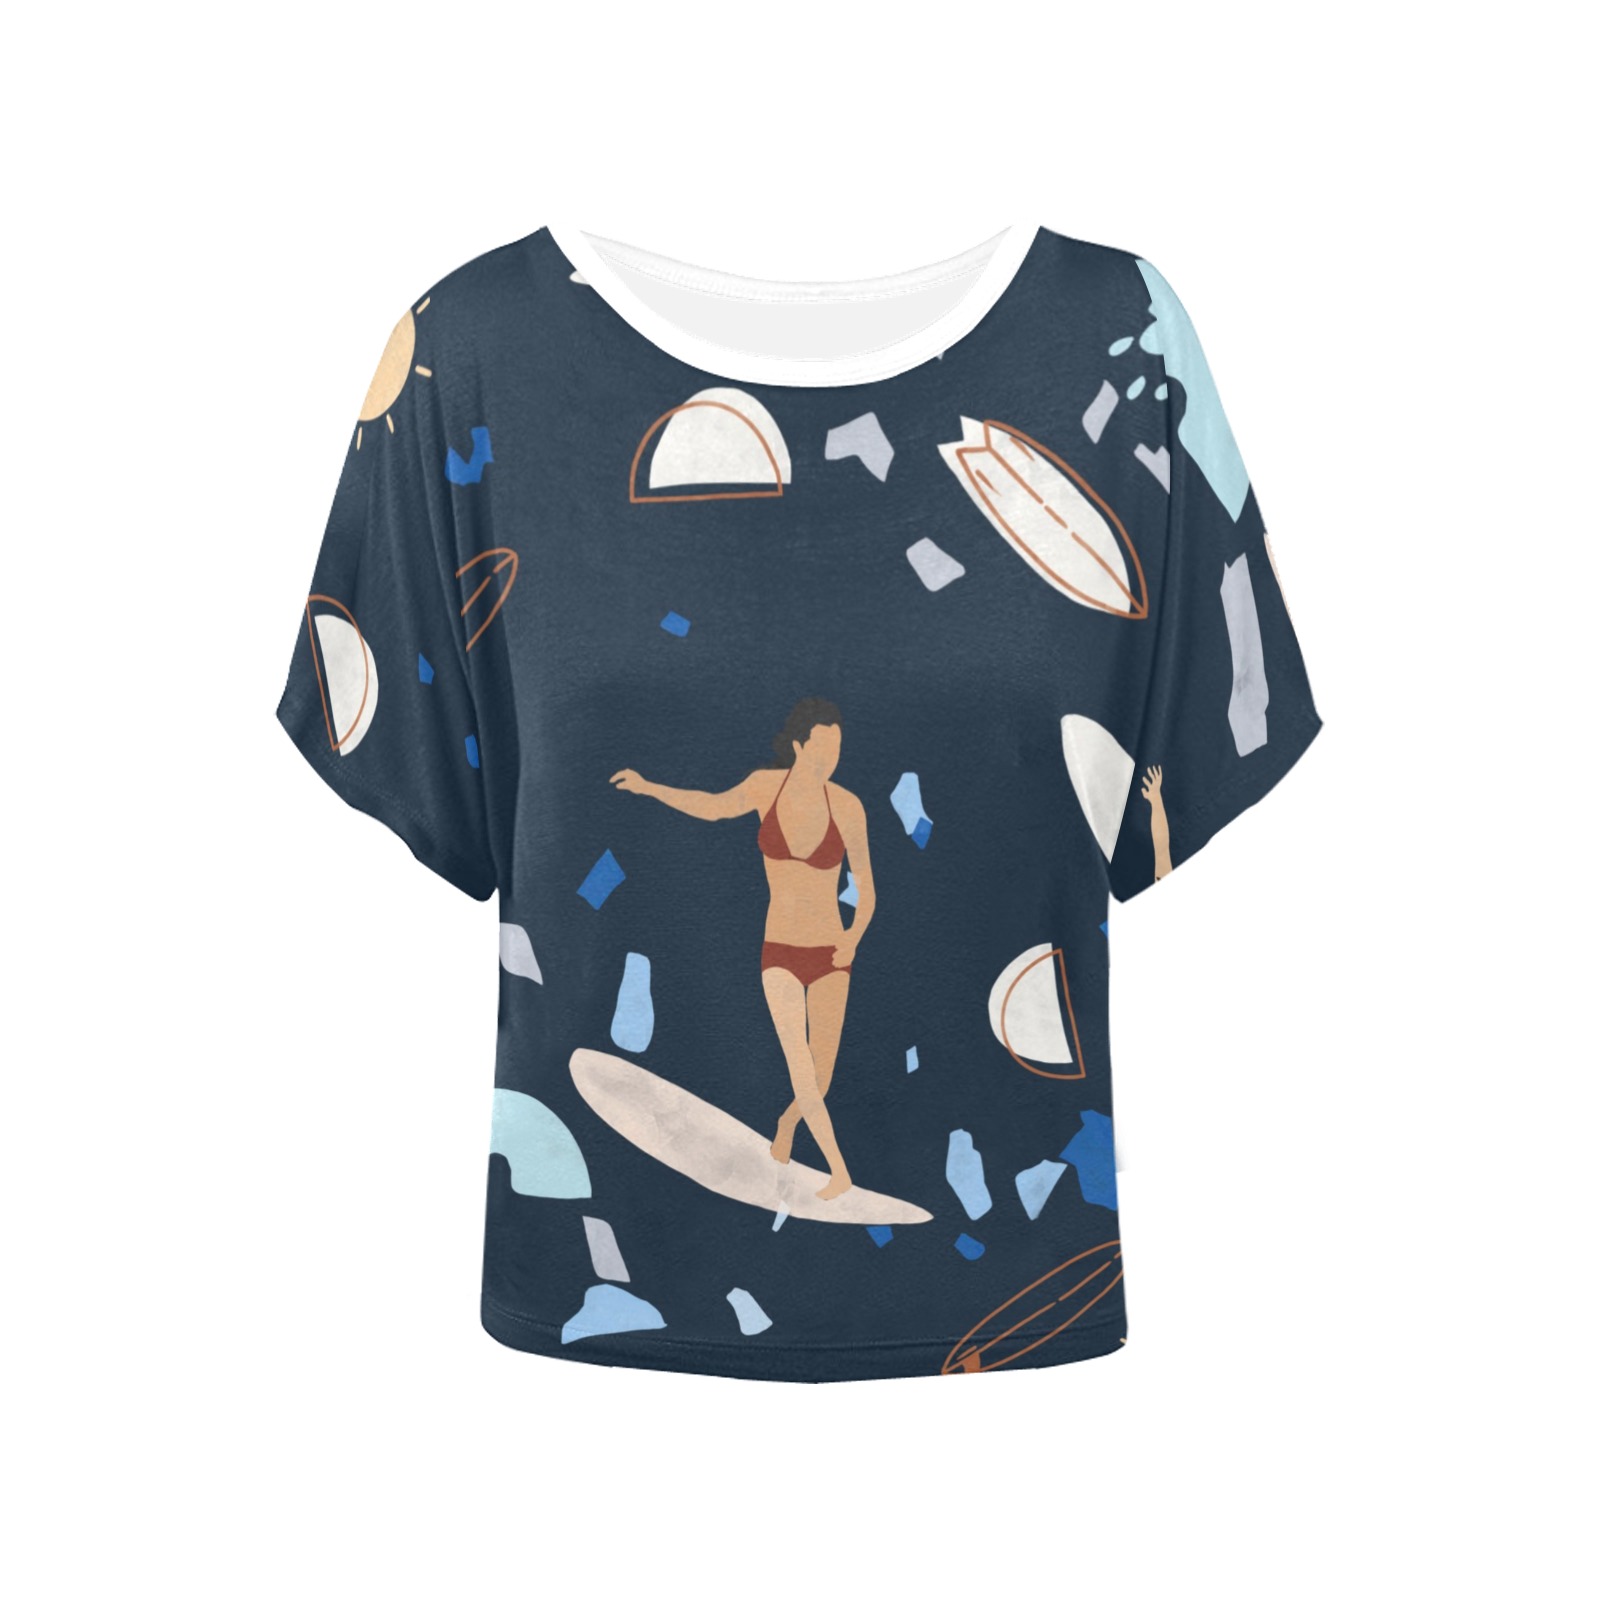 Surfing the terrazzo sea 2 Women's Batwing-Sleeved Blouse T shirt (Model T44)